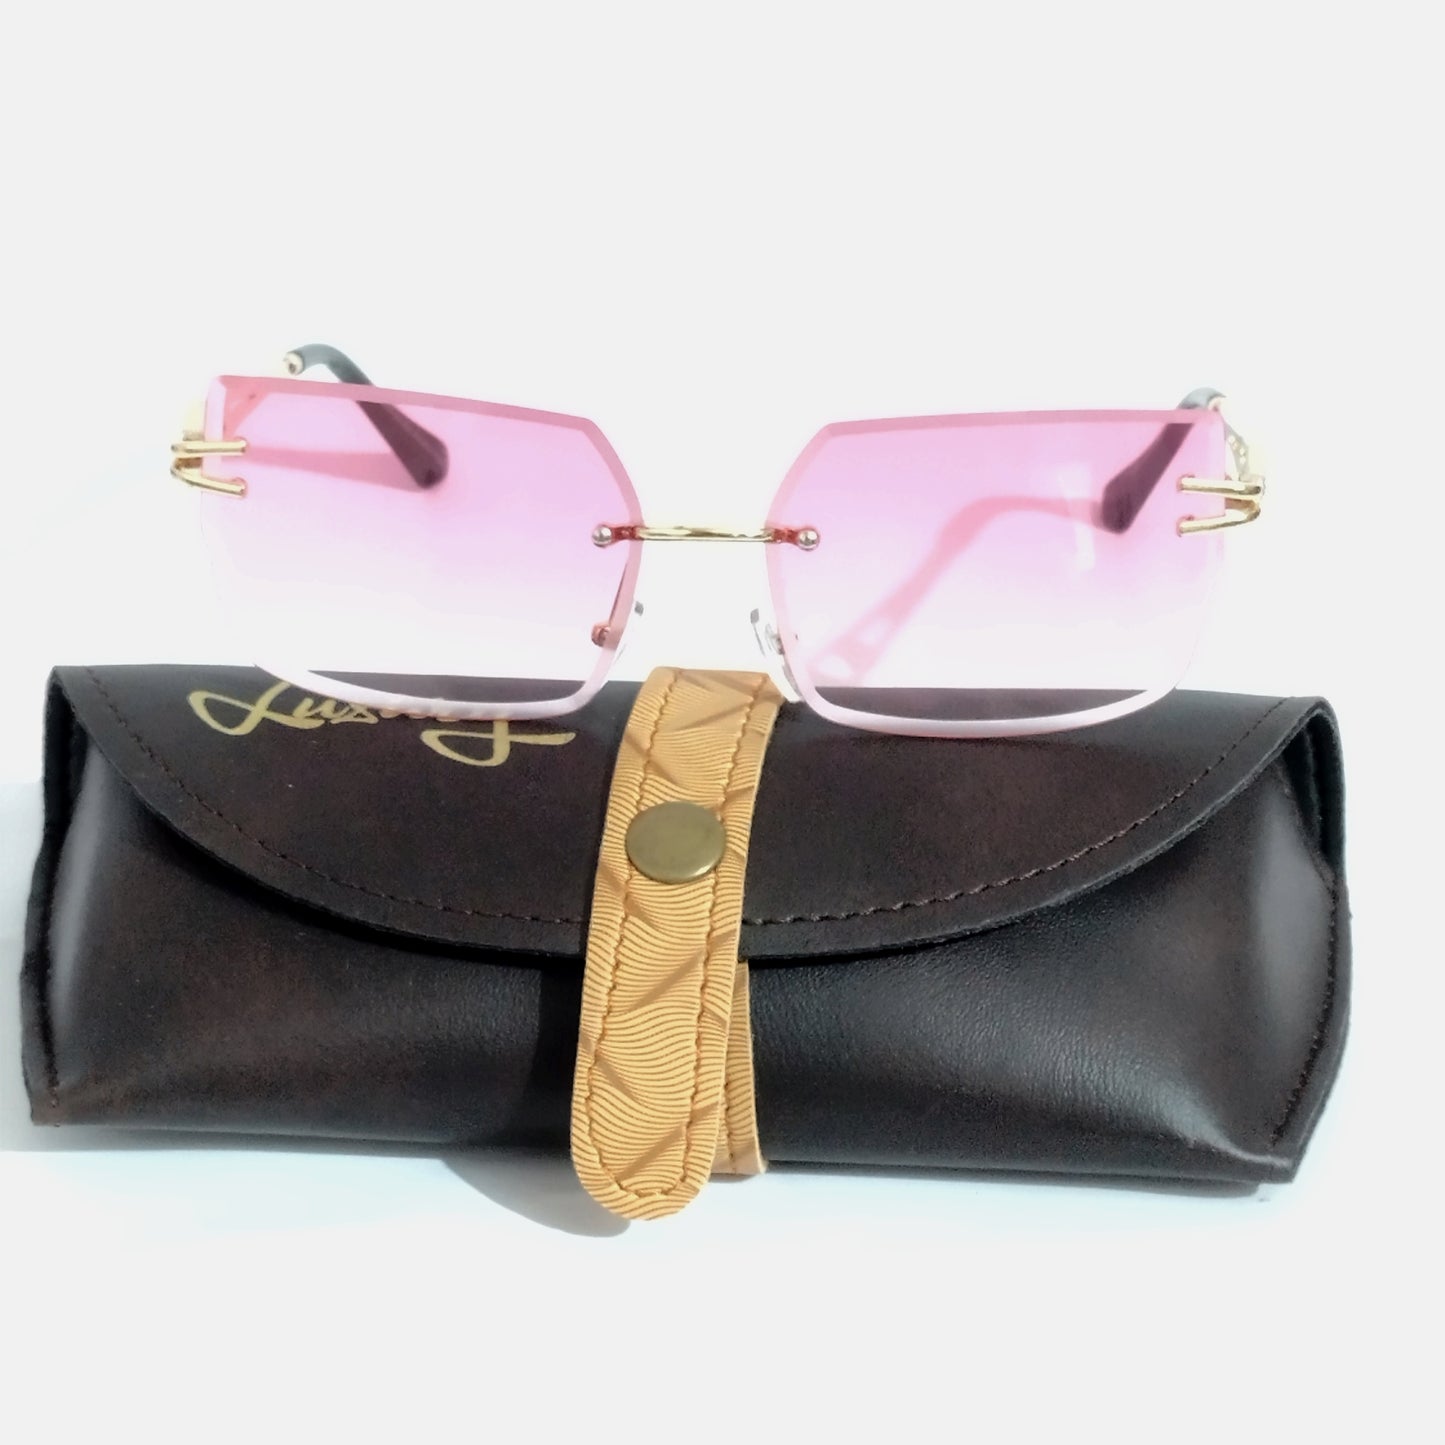 Enchant in Rose Gold Pink: Chic Rimless Sunglasses with a Modern Twist